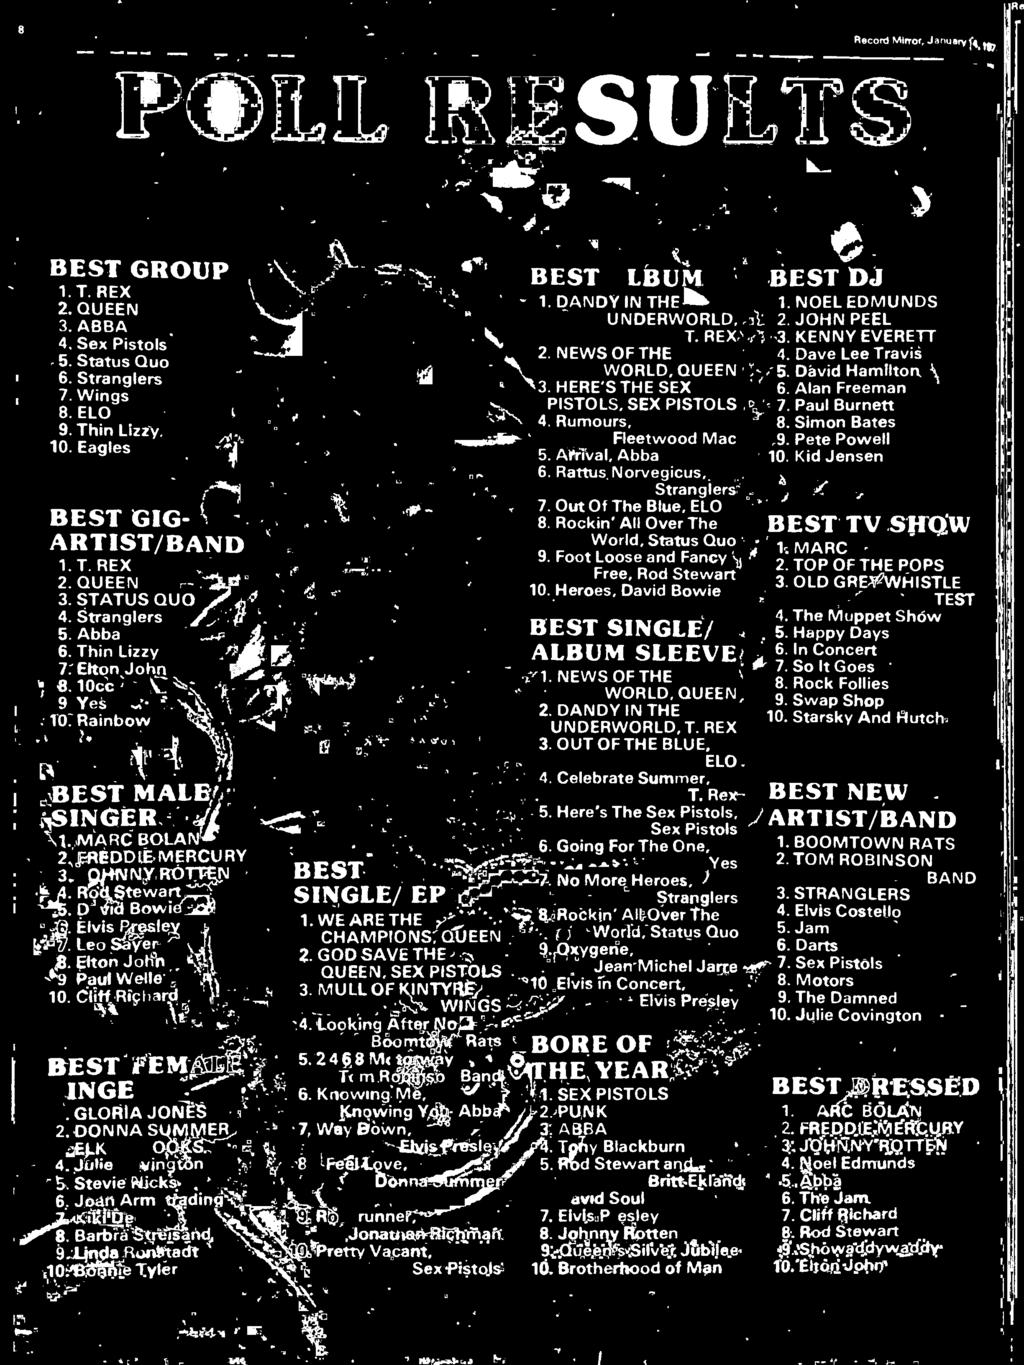 Here's The Sex Pstols, Sex Pstols 6. Gong For The One, Yes BEST 7:N6 -More Heroes, SNGLE/ EP Stranglers. WE ARE THE r 8: Rockn' AllOver the CHAMPONS, QUEEN World, Status Quo 2. dodsave;the, 9.